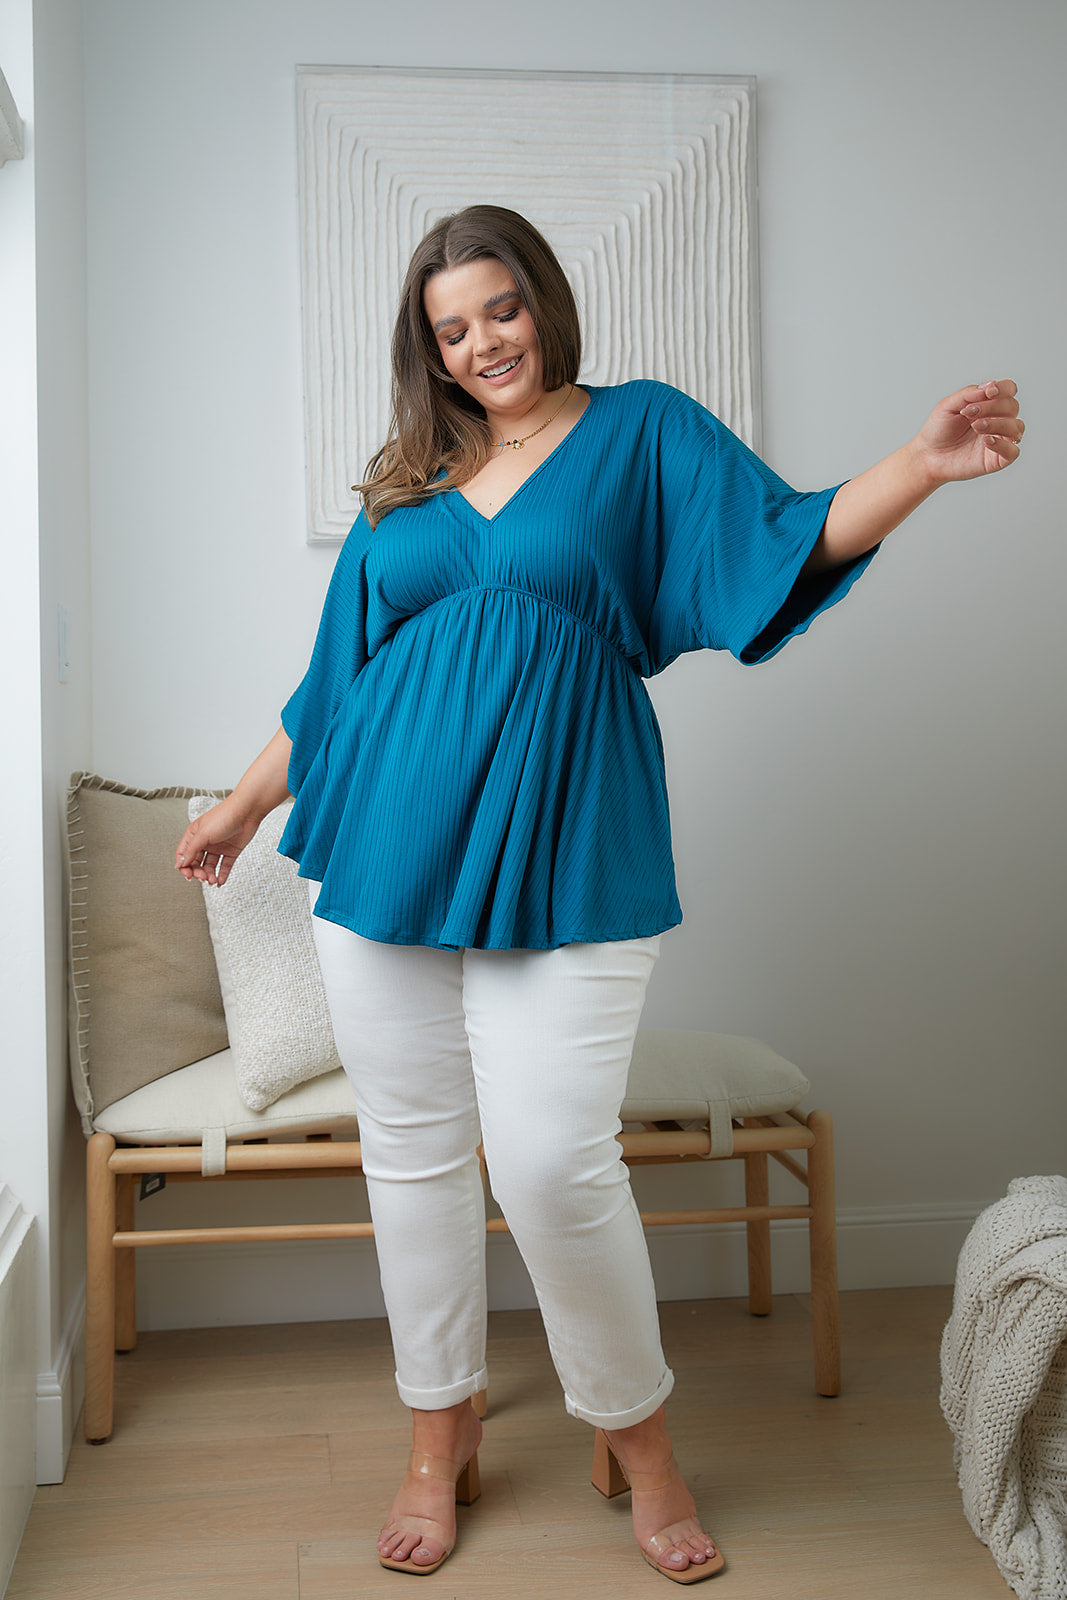 Storied Moments Draped Peplum Top in Teal - 5/19/2023